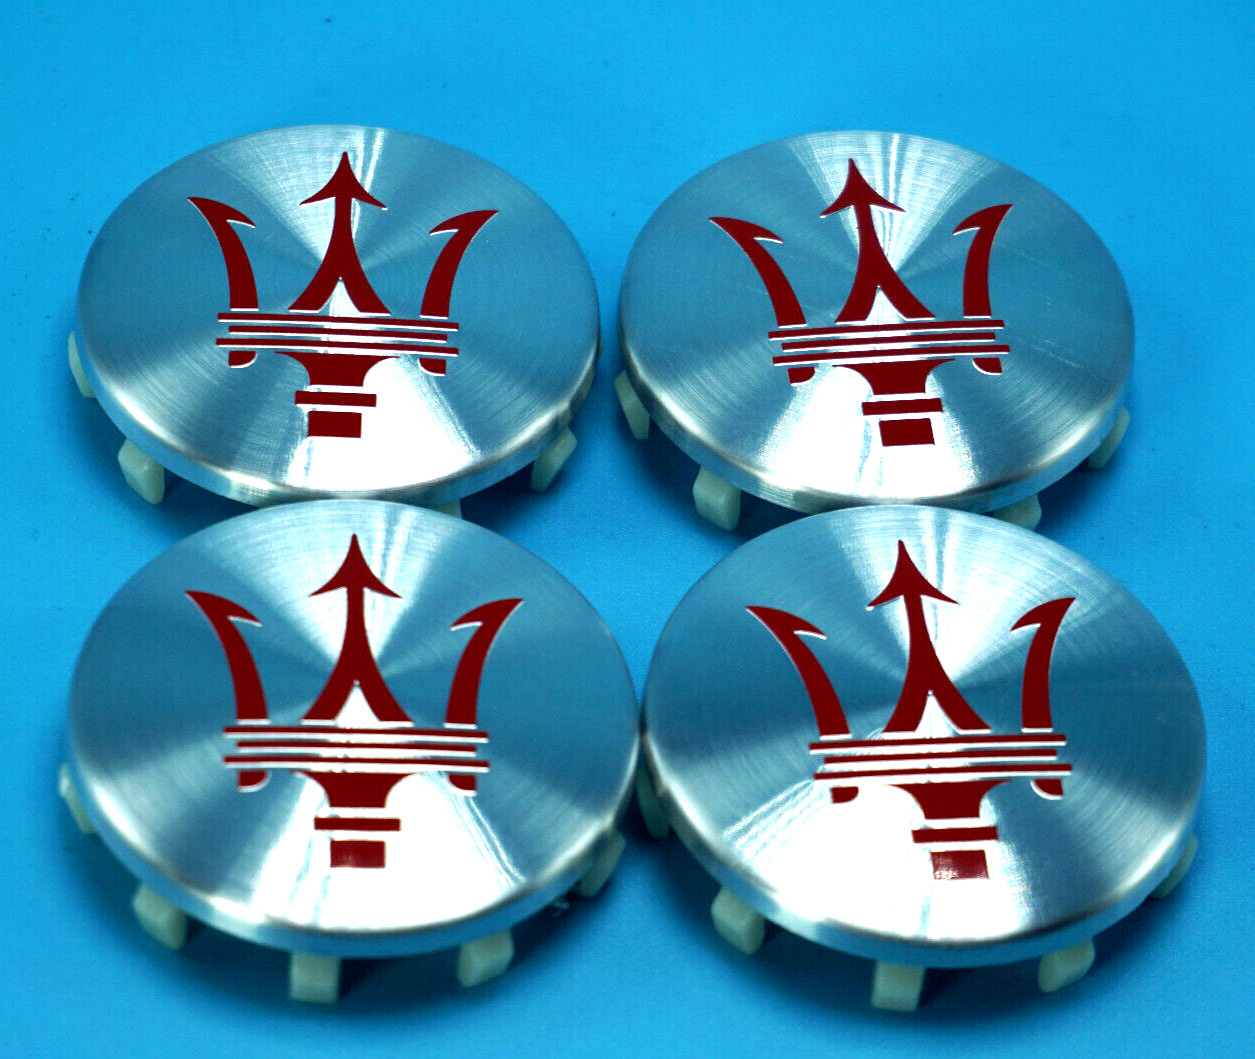 2002-18 MASERATI WHEEL CENTER CAPS SILVER WITH RED TRIDENT SET OF 4 - - 60mm